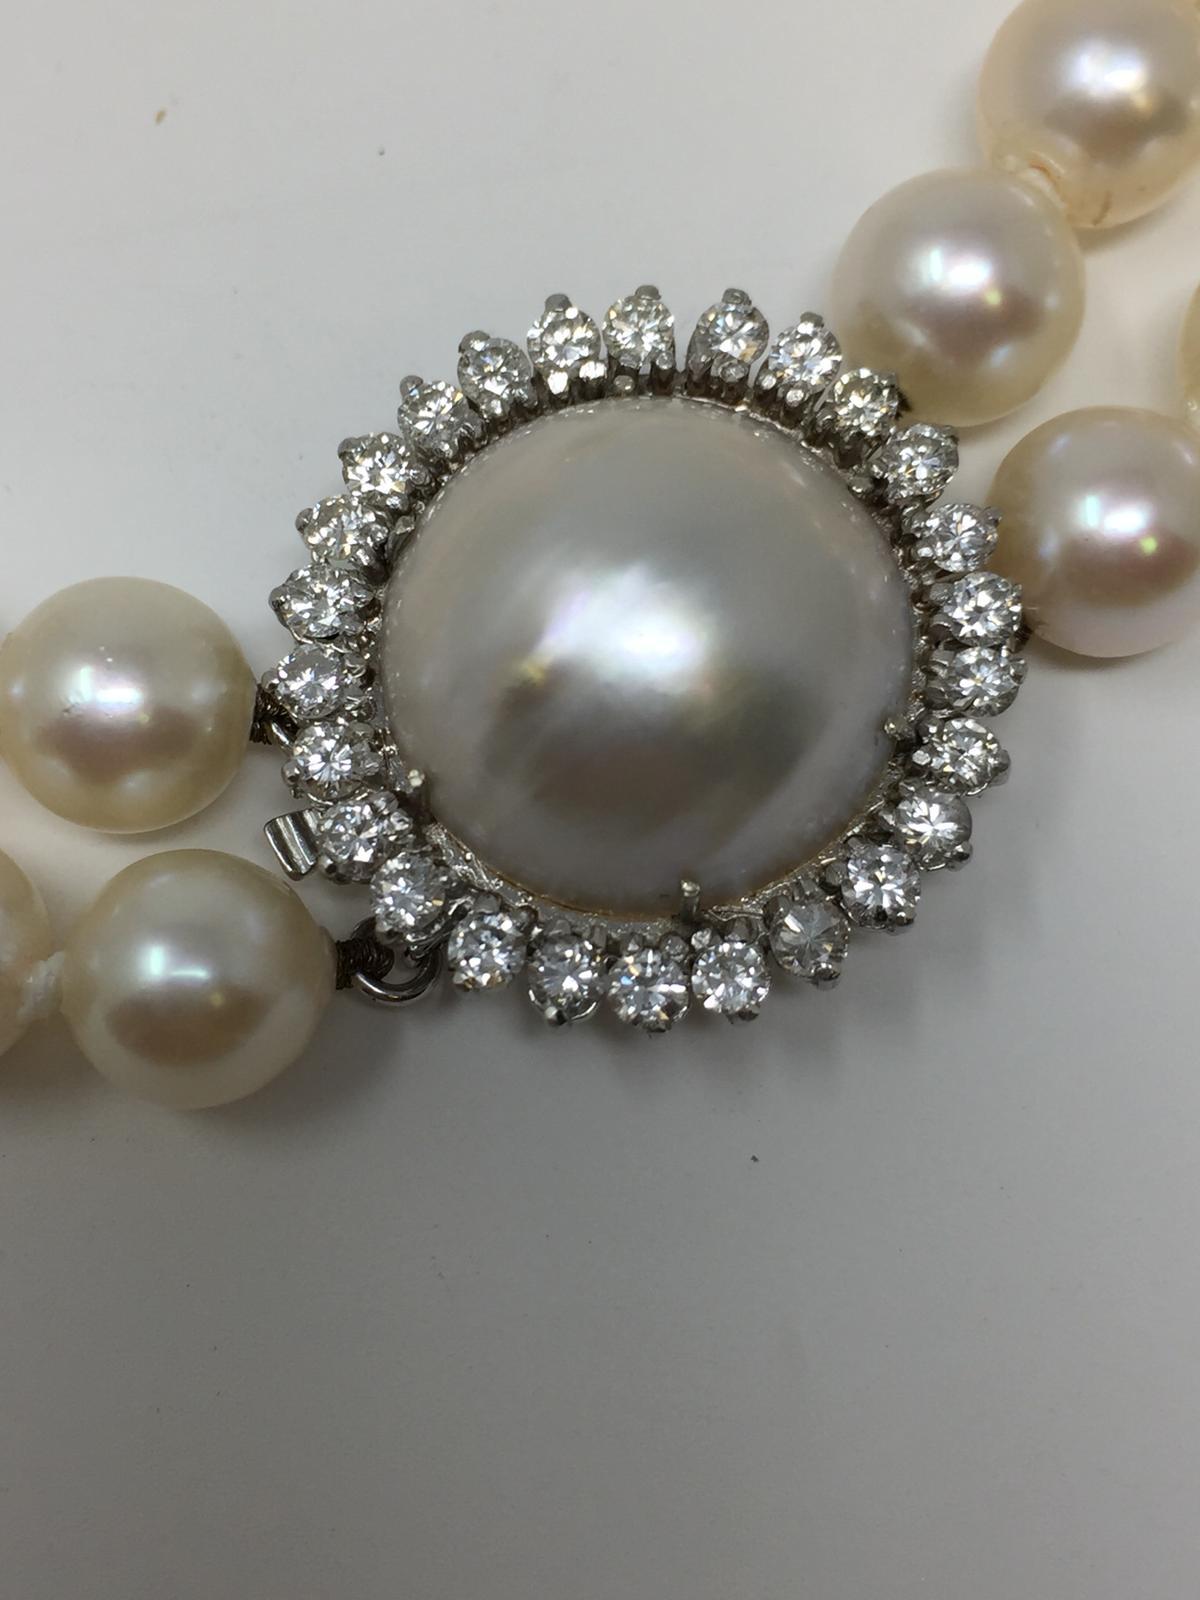 Double strand Japanese Cultured Pearl with creamy high luster appearance.
14kt white gold Diamond and moby pearl clasp. The diamonds are weighing approx. 1.50 ct/tw VS-SI quality in G color. 
Moby pearl is measuring approx. 22mm.